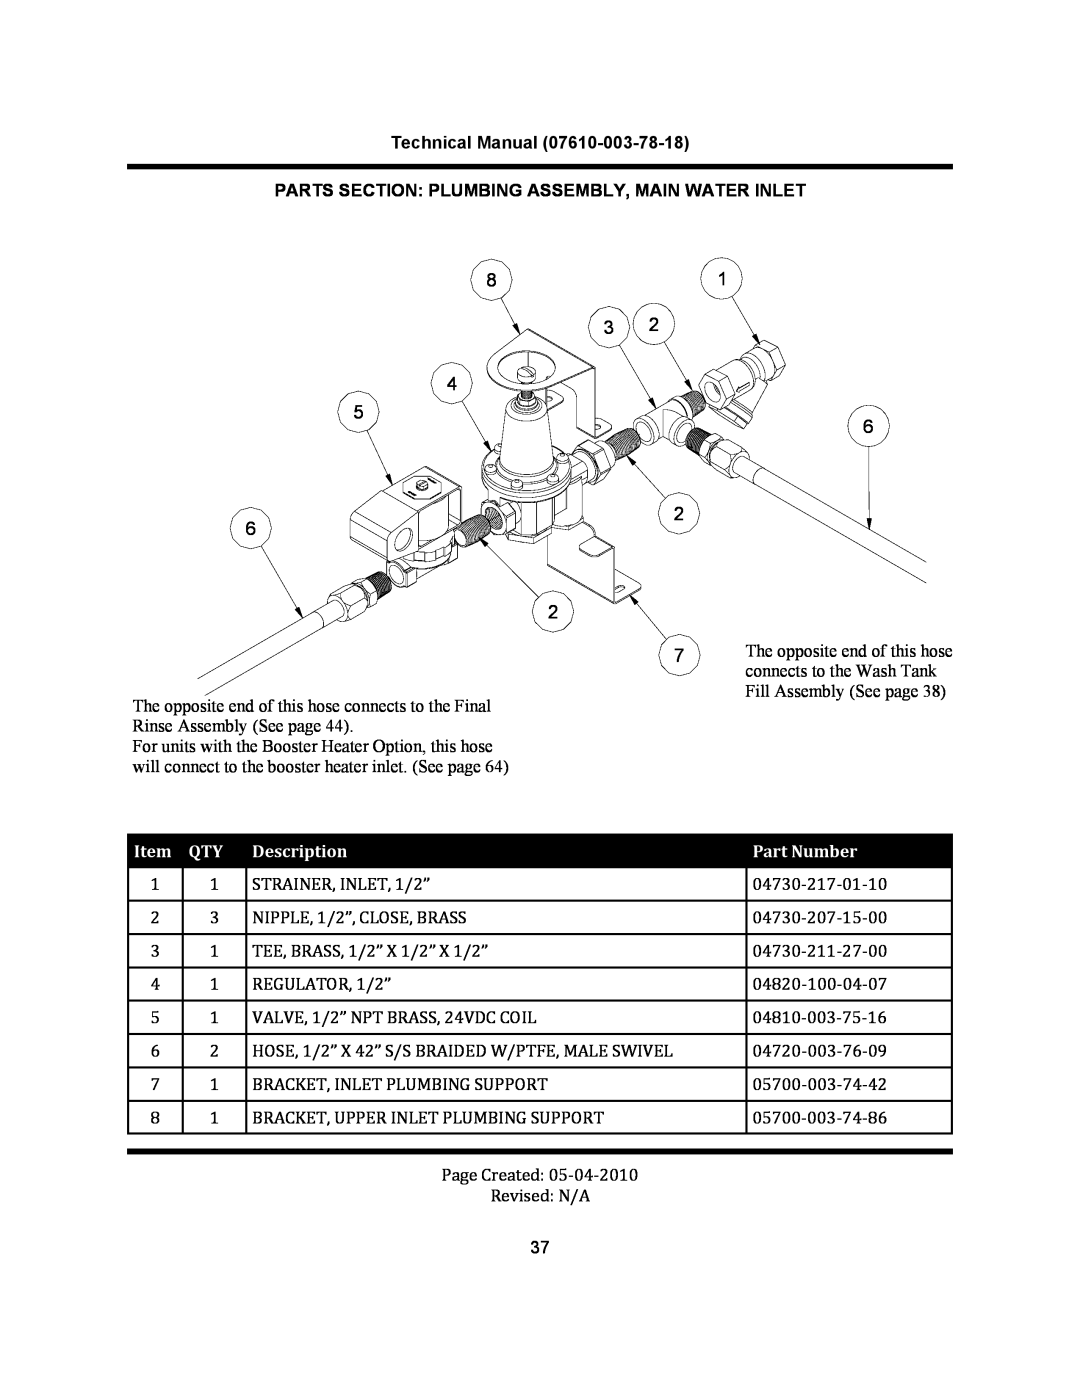 Jackson CREW 44, CREW 66S Technical Manual PARTS SECTION PLUMBING ASSEMBLY, MAIN WATER INLET, Description, Part Number 